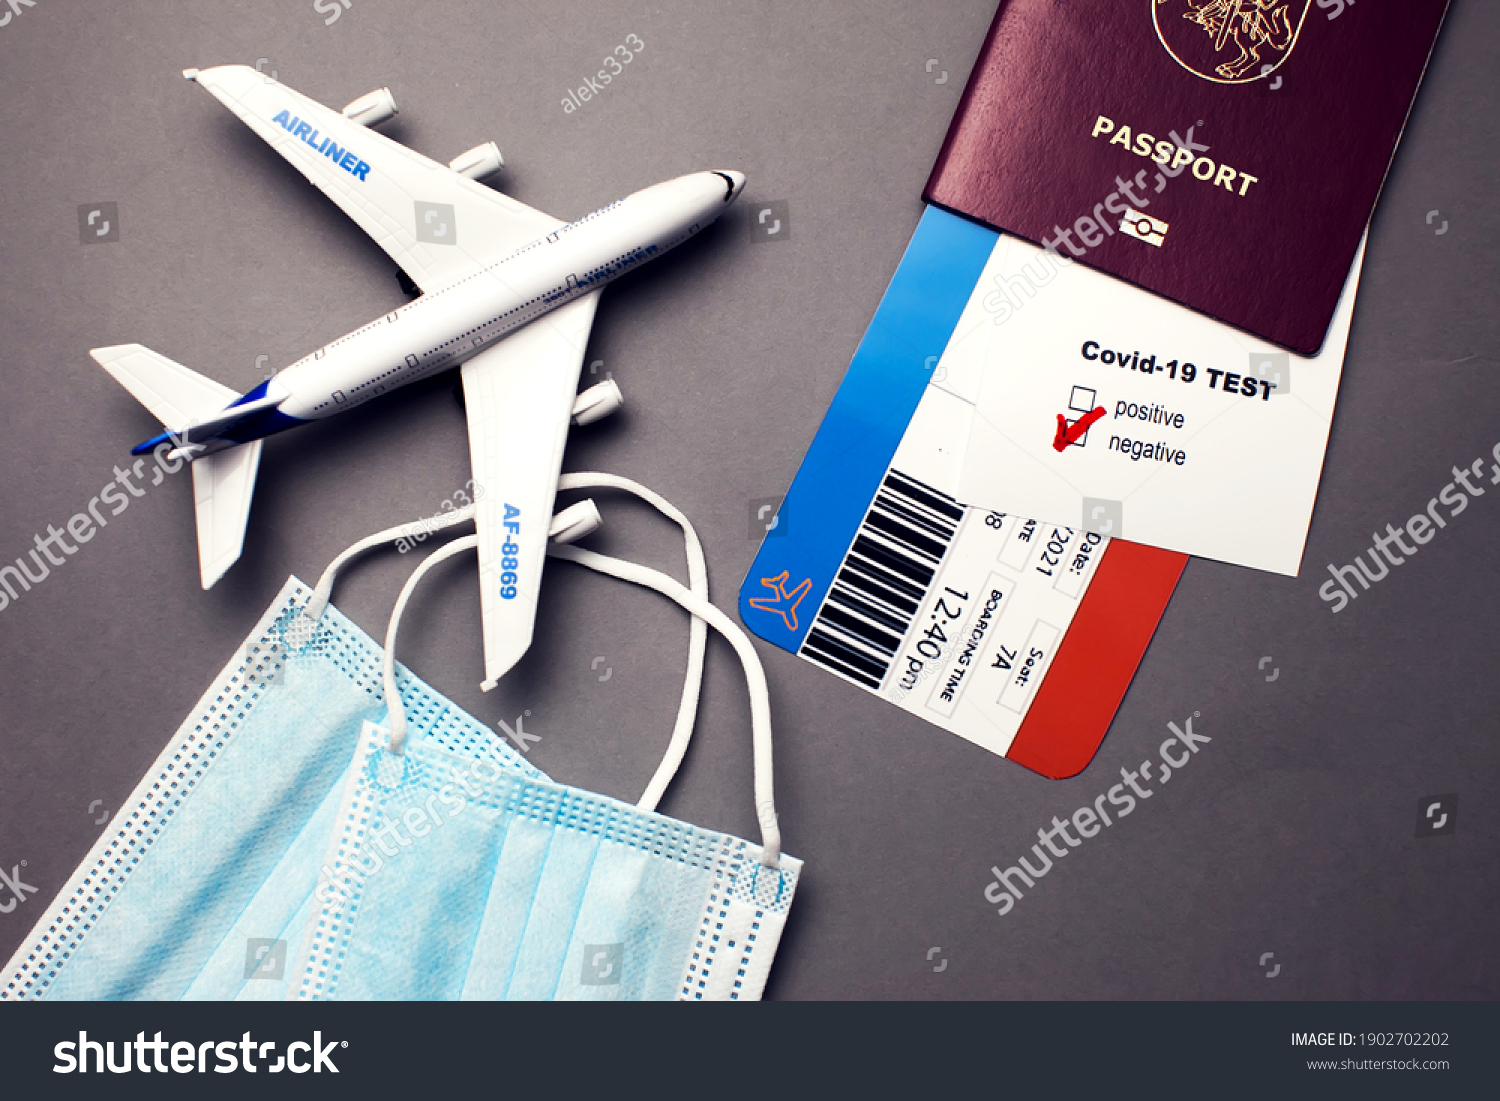 Traveling during COVID-19 pandemic, passport with airline ticket, covid-19 negative test, medical masks and plane on grey background, airport security health and safety check concept #1902702202